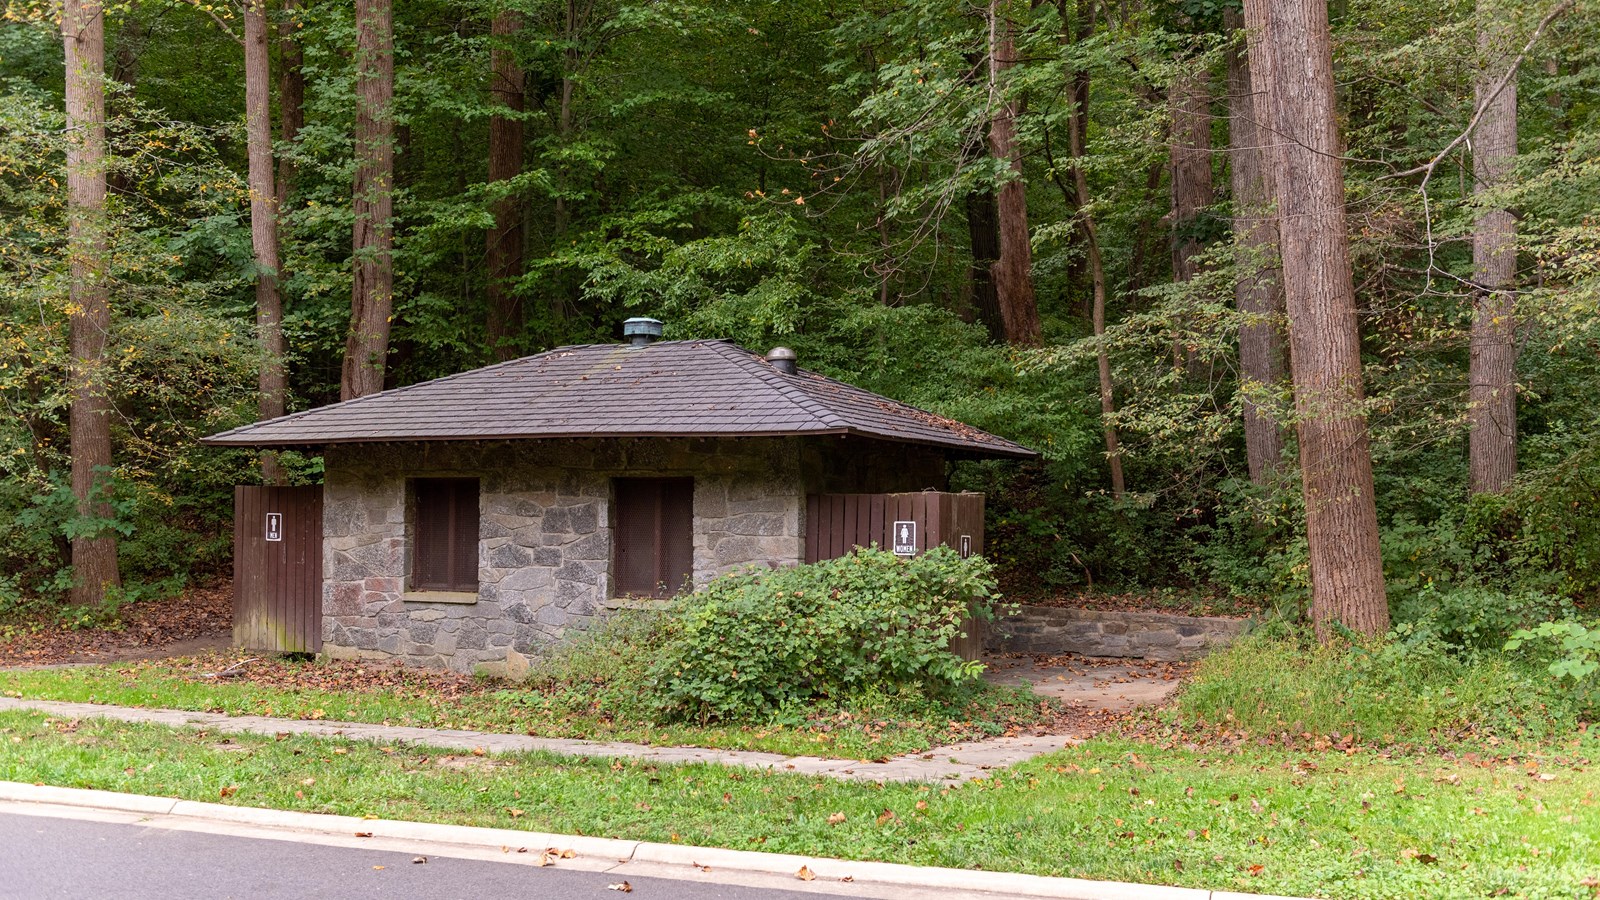 A stone restroom in a wooded area next to a road.  